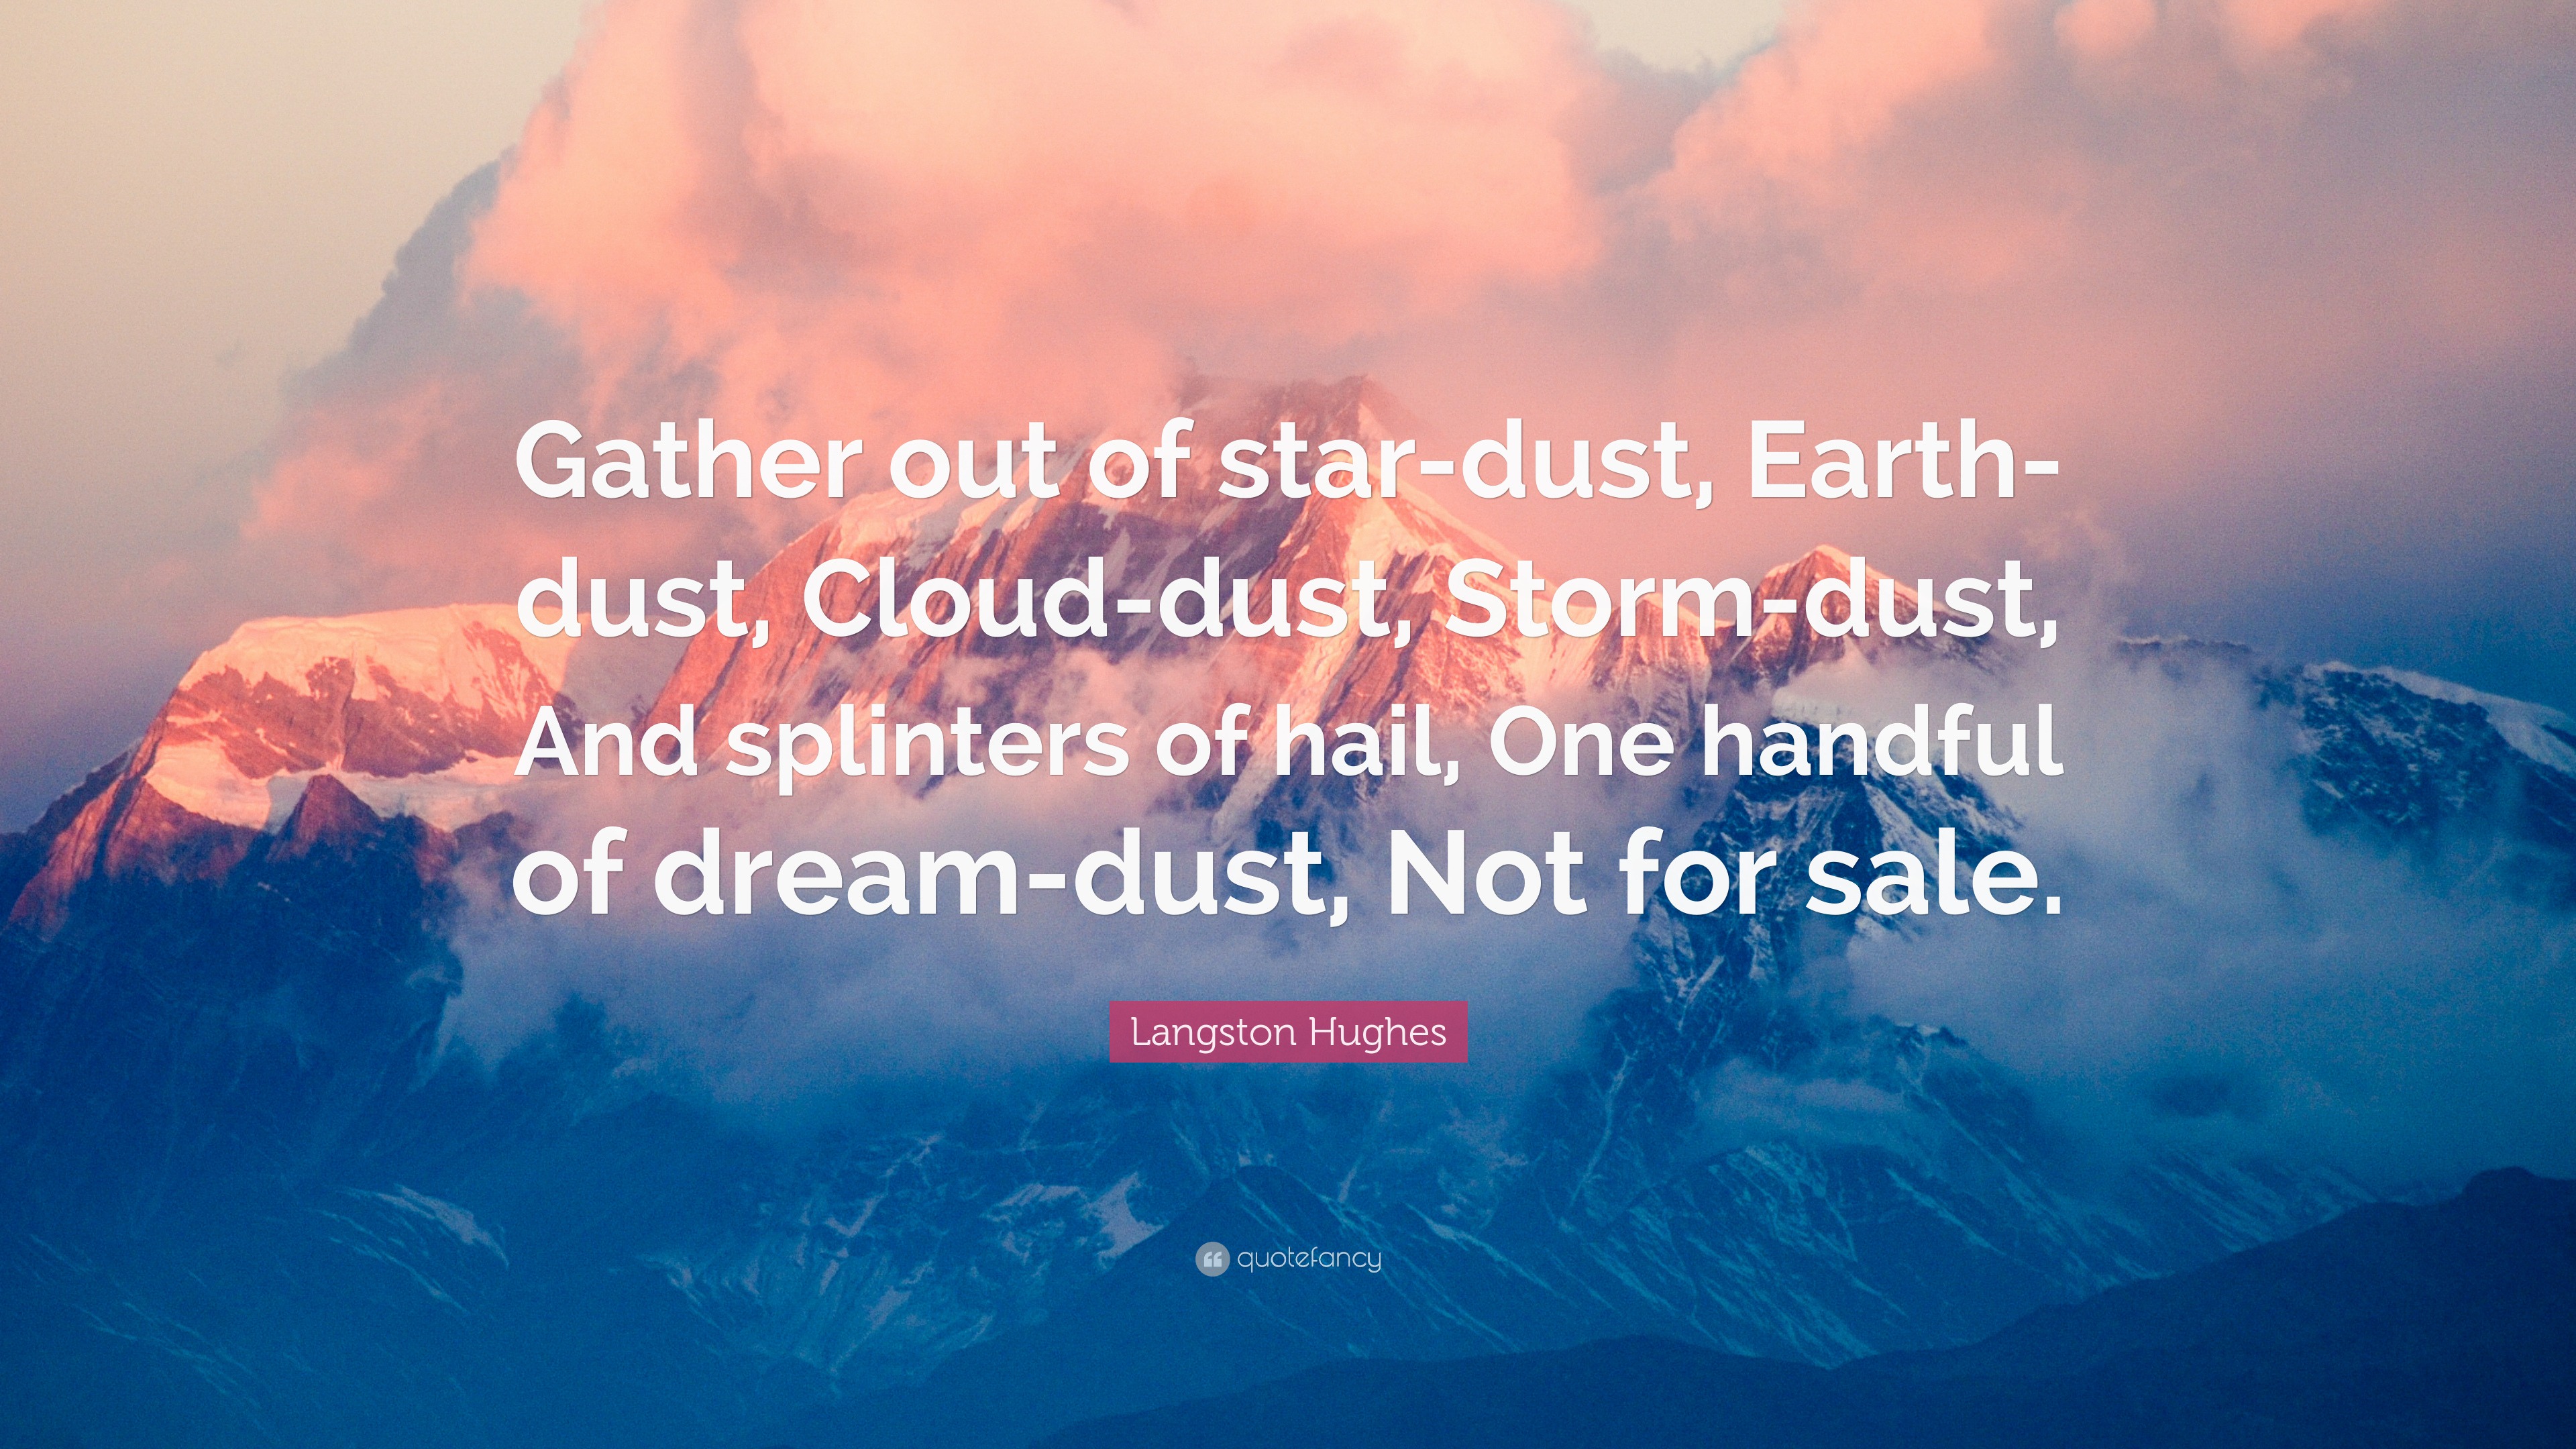 Dream Dust” BY LANGSTON HUGHES Gather out of star-dust Earth-dust, Cloud- dust, And splinters of hail, One handful of dream-dust